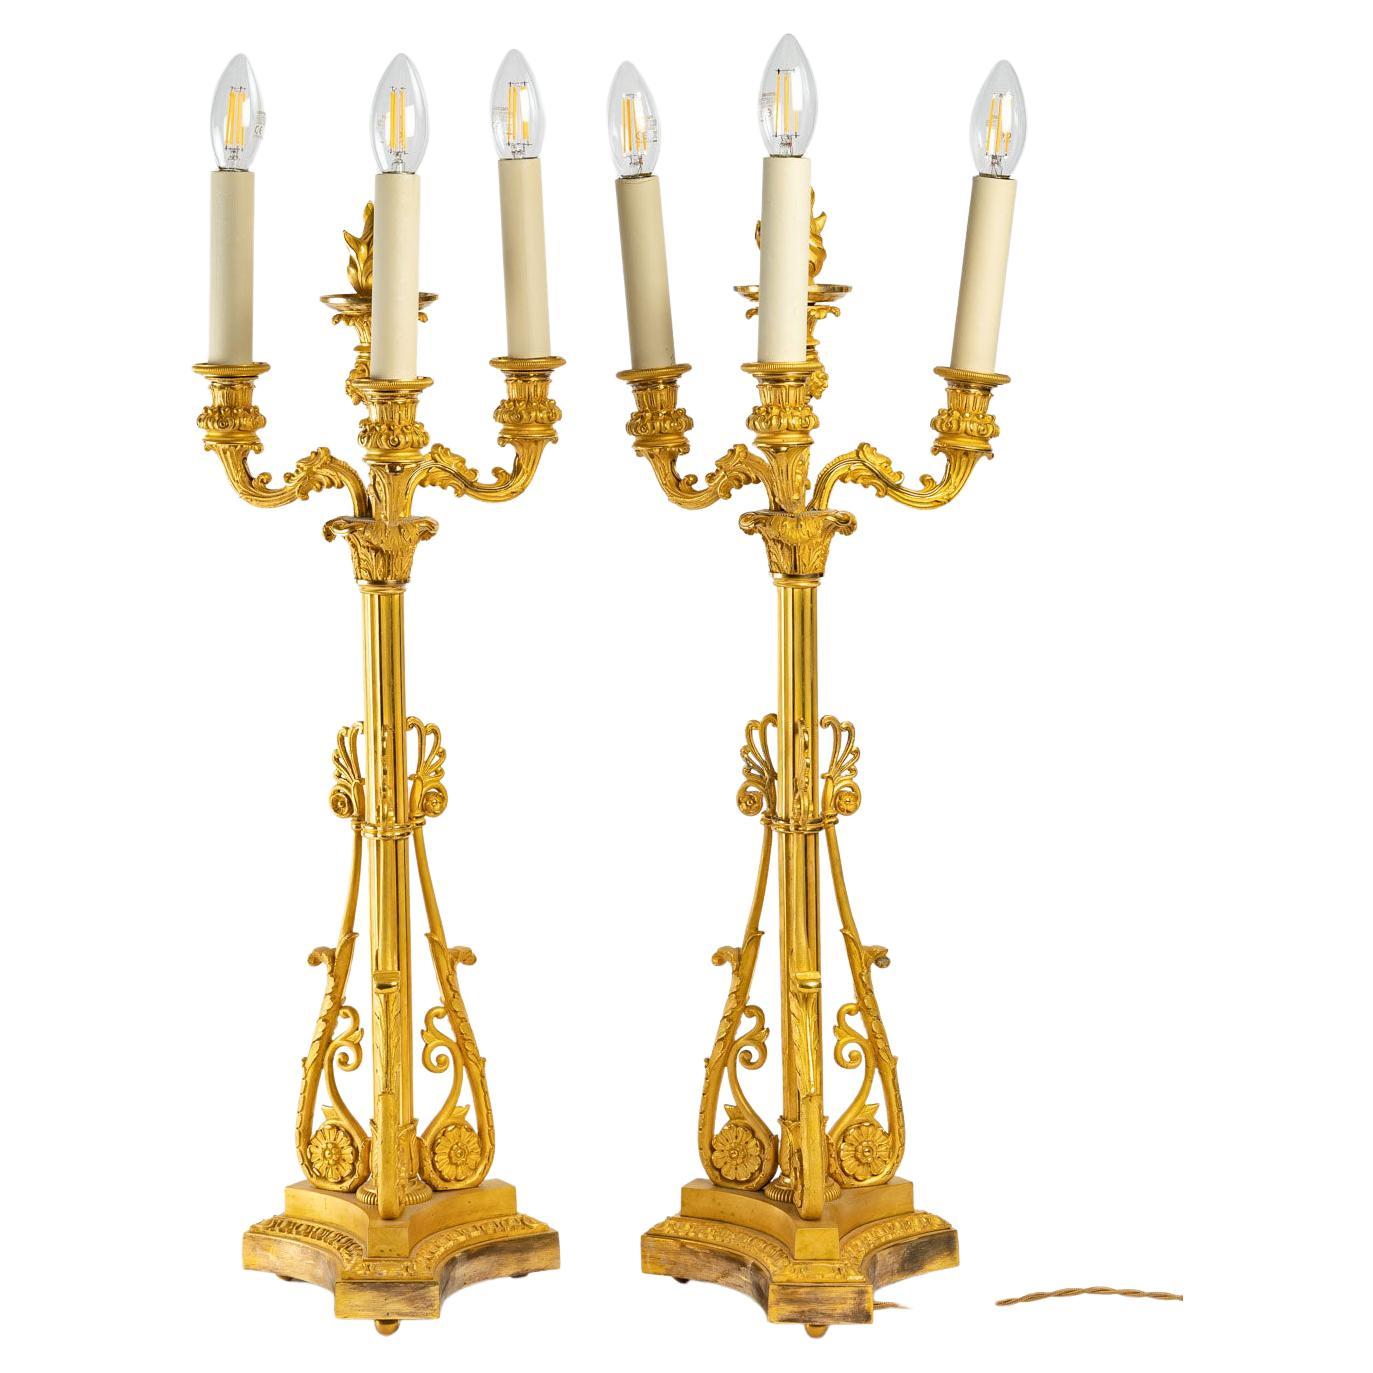 Pair of Early 19th Century Gilt Bronze Candlesticks